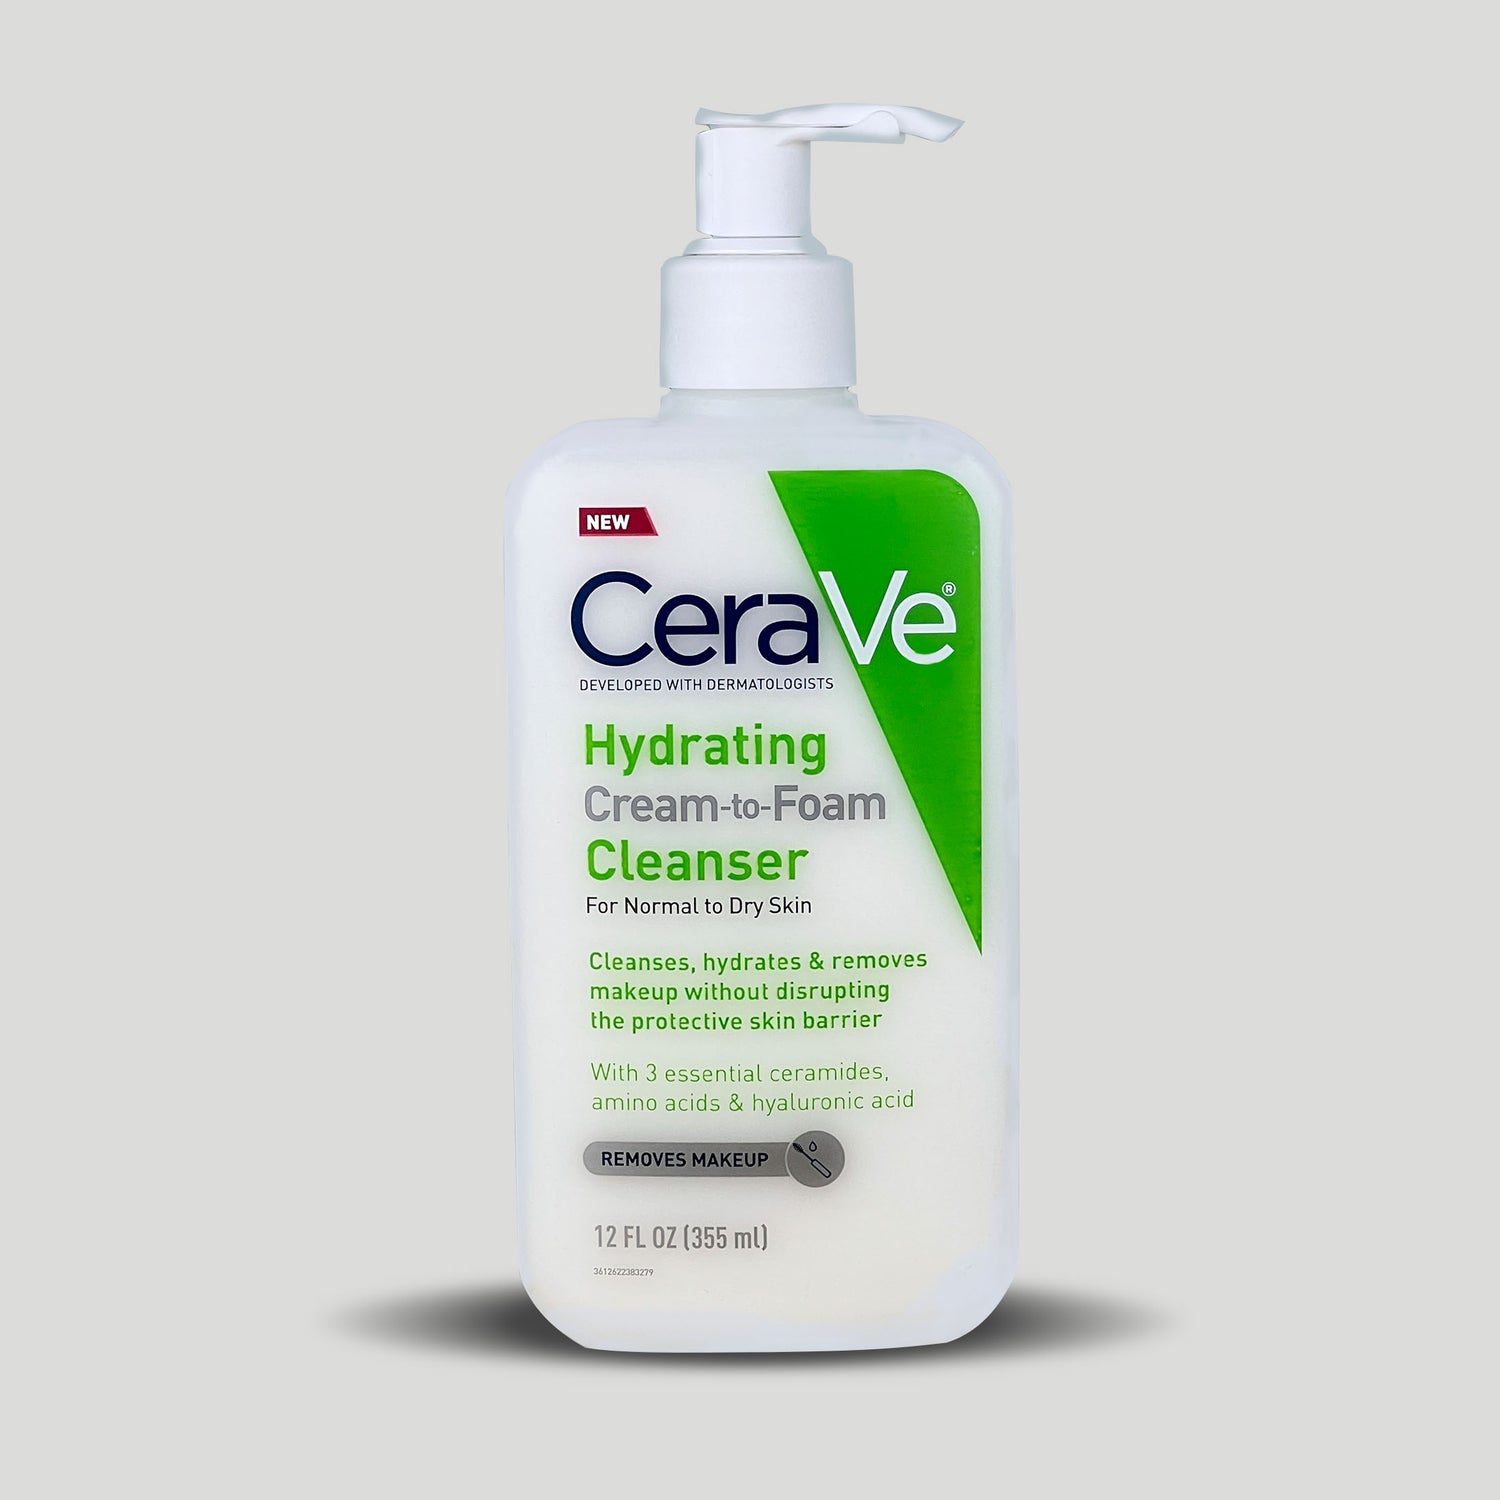 CeraVe Hydrating Cream to Foam Facial Cleanser